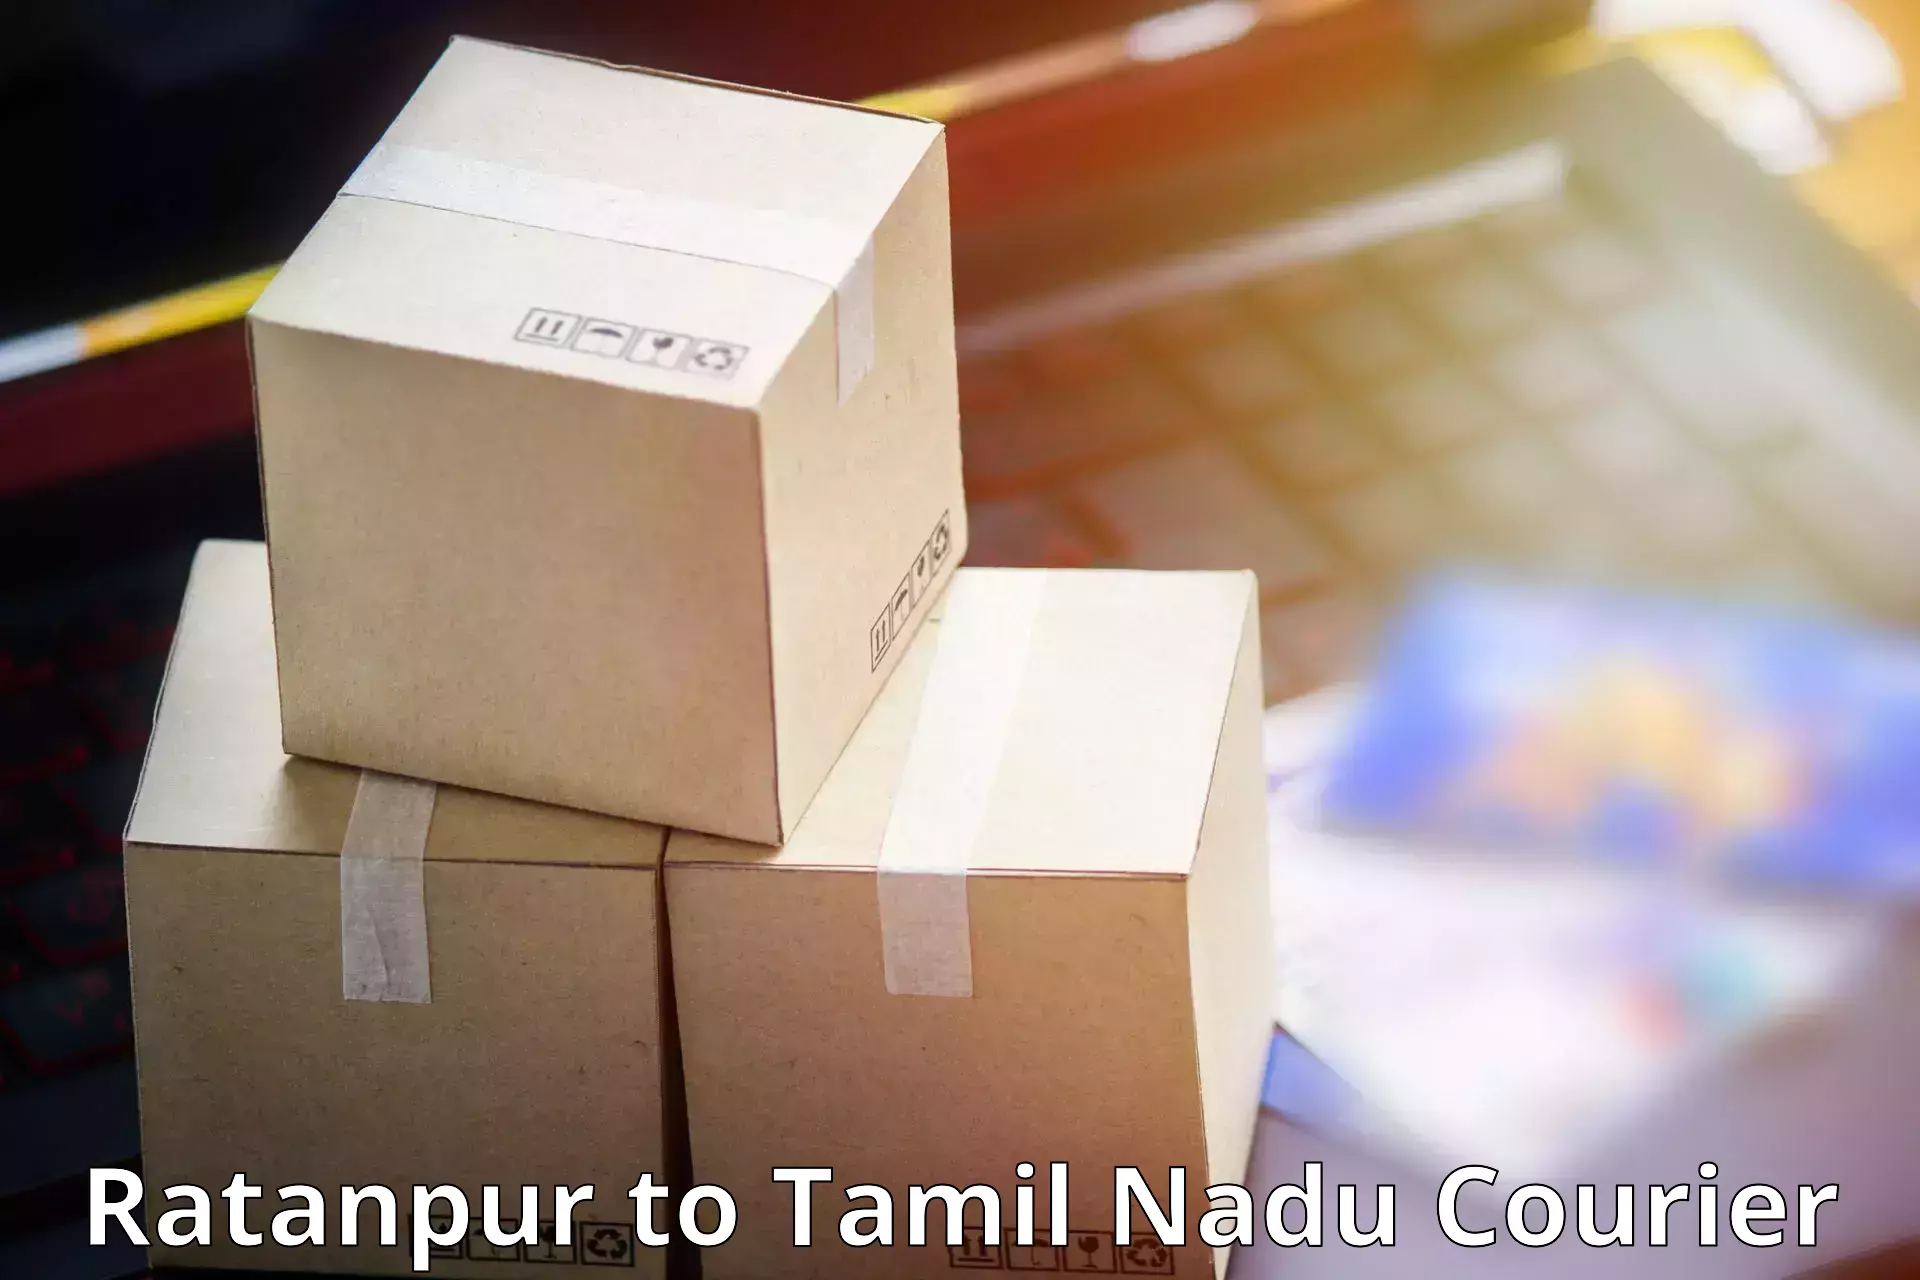 Easy access courier services in Ratanpur to Ennore Port Chennai